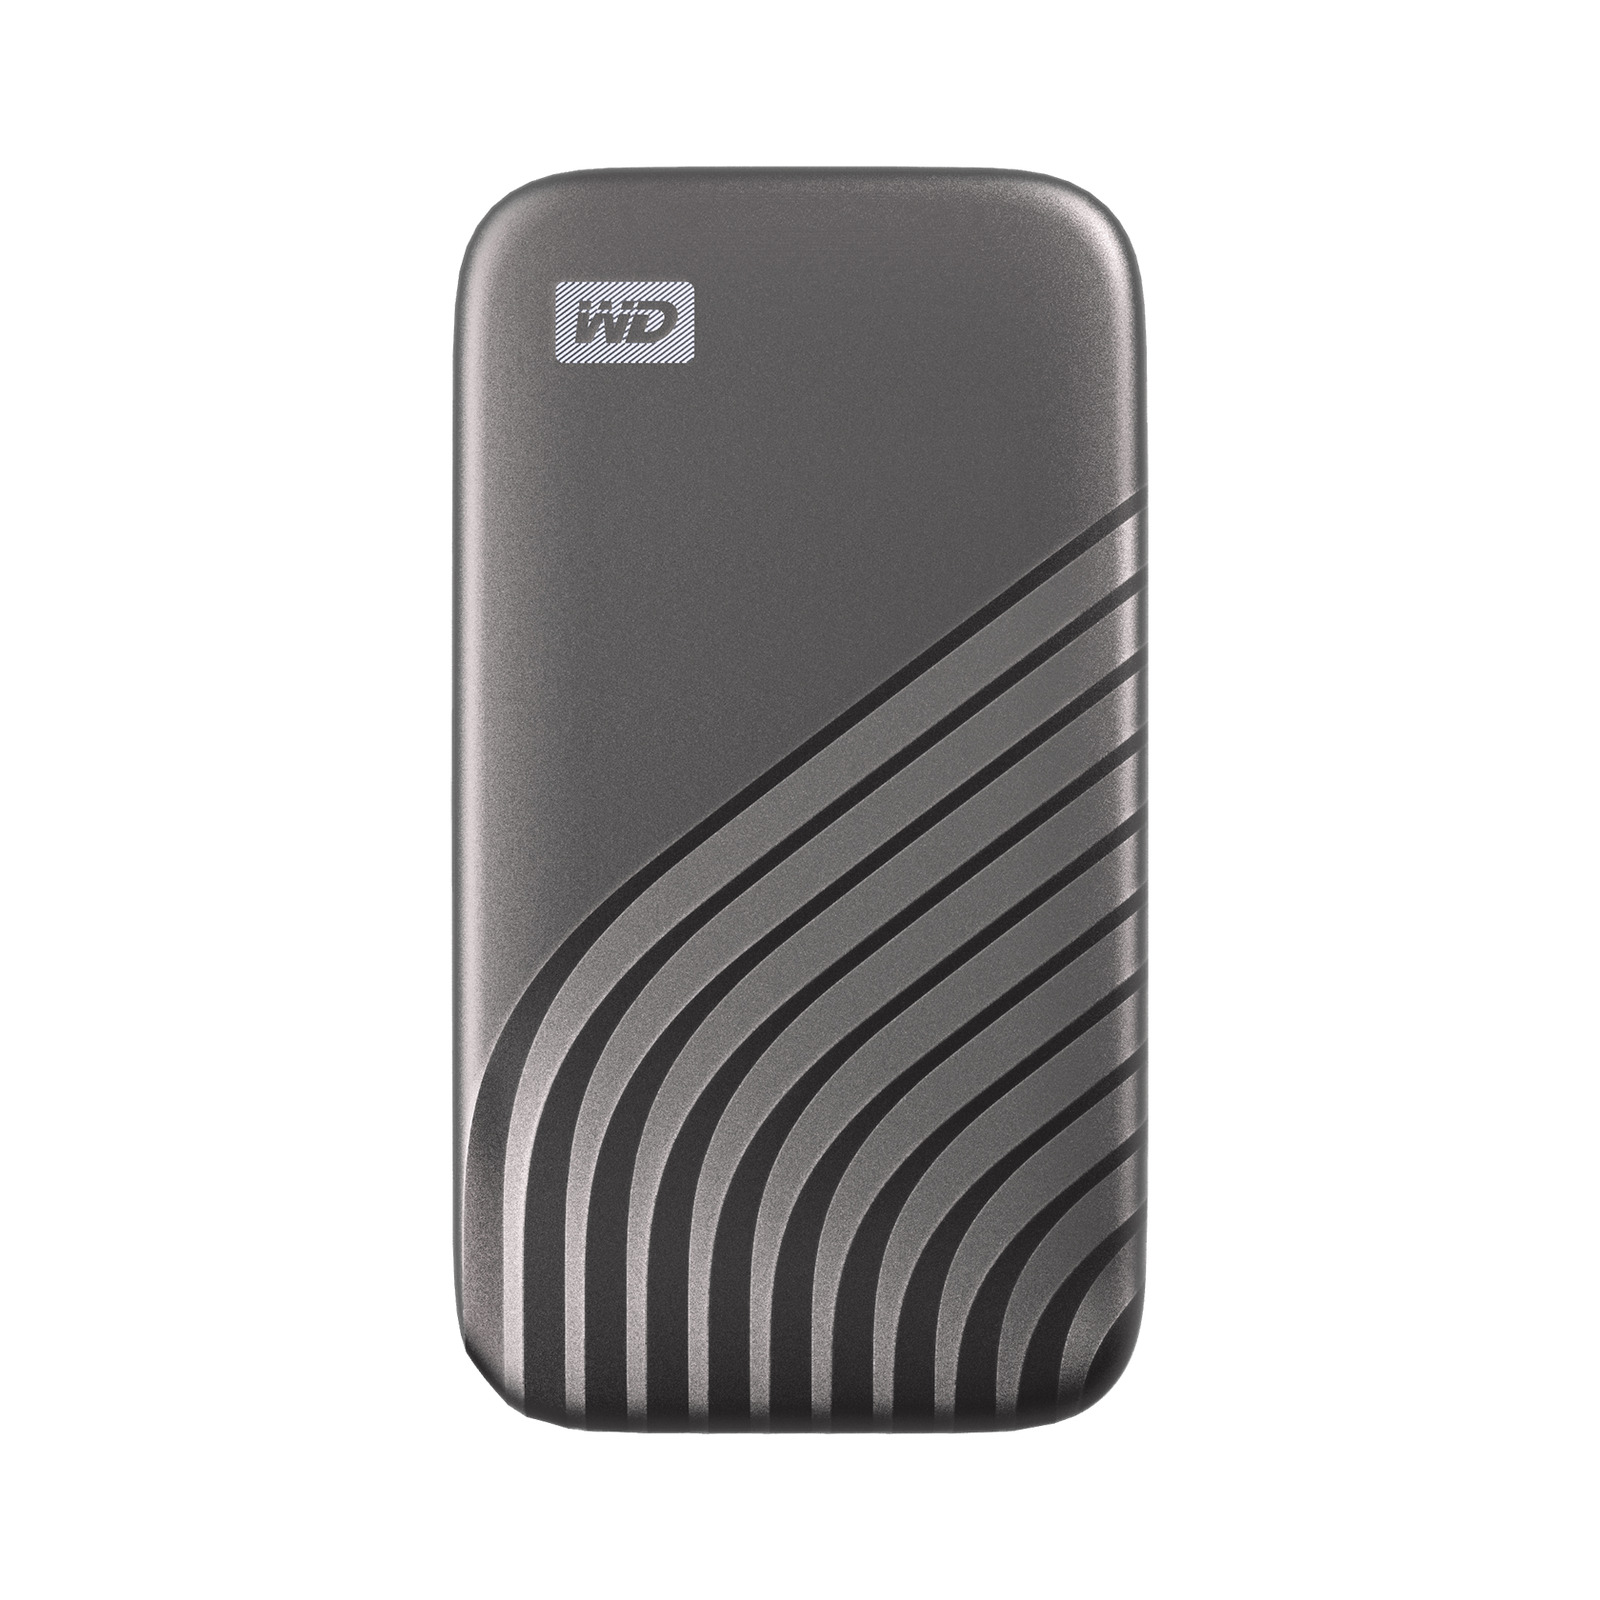 WD 500GB My Passport SSD Portable External Solid State Drive WDBAGF5000AGY-WESN